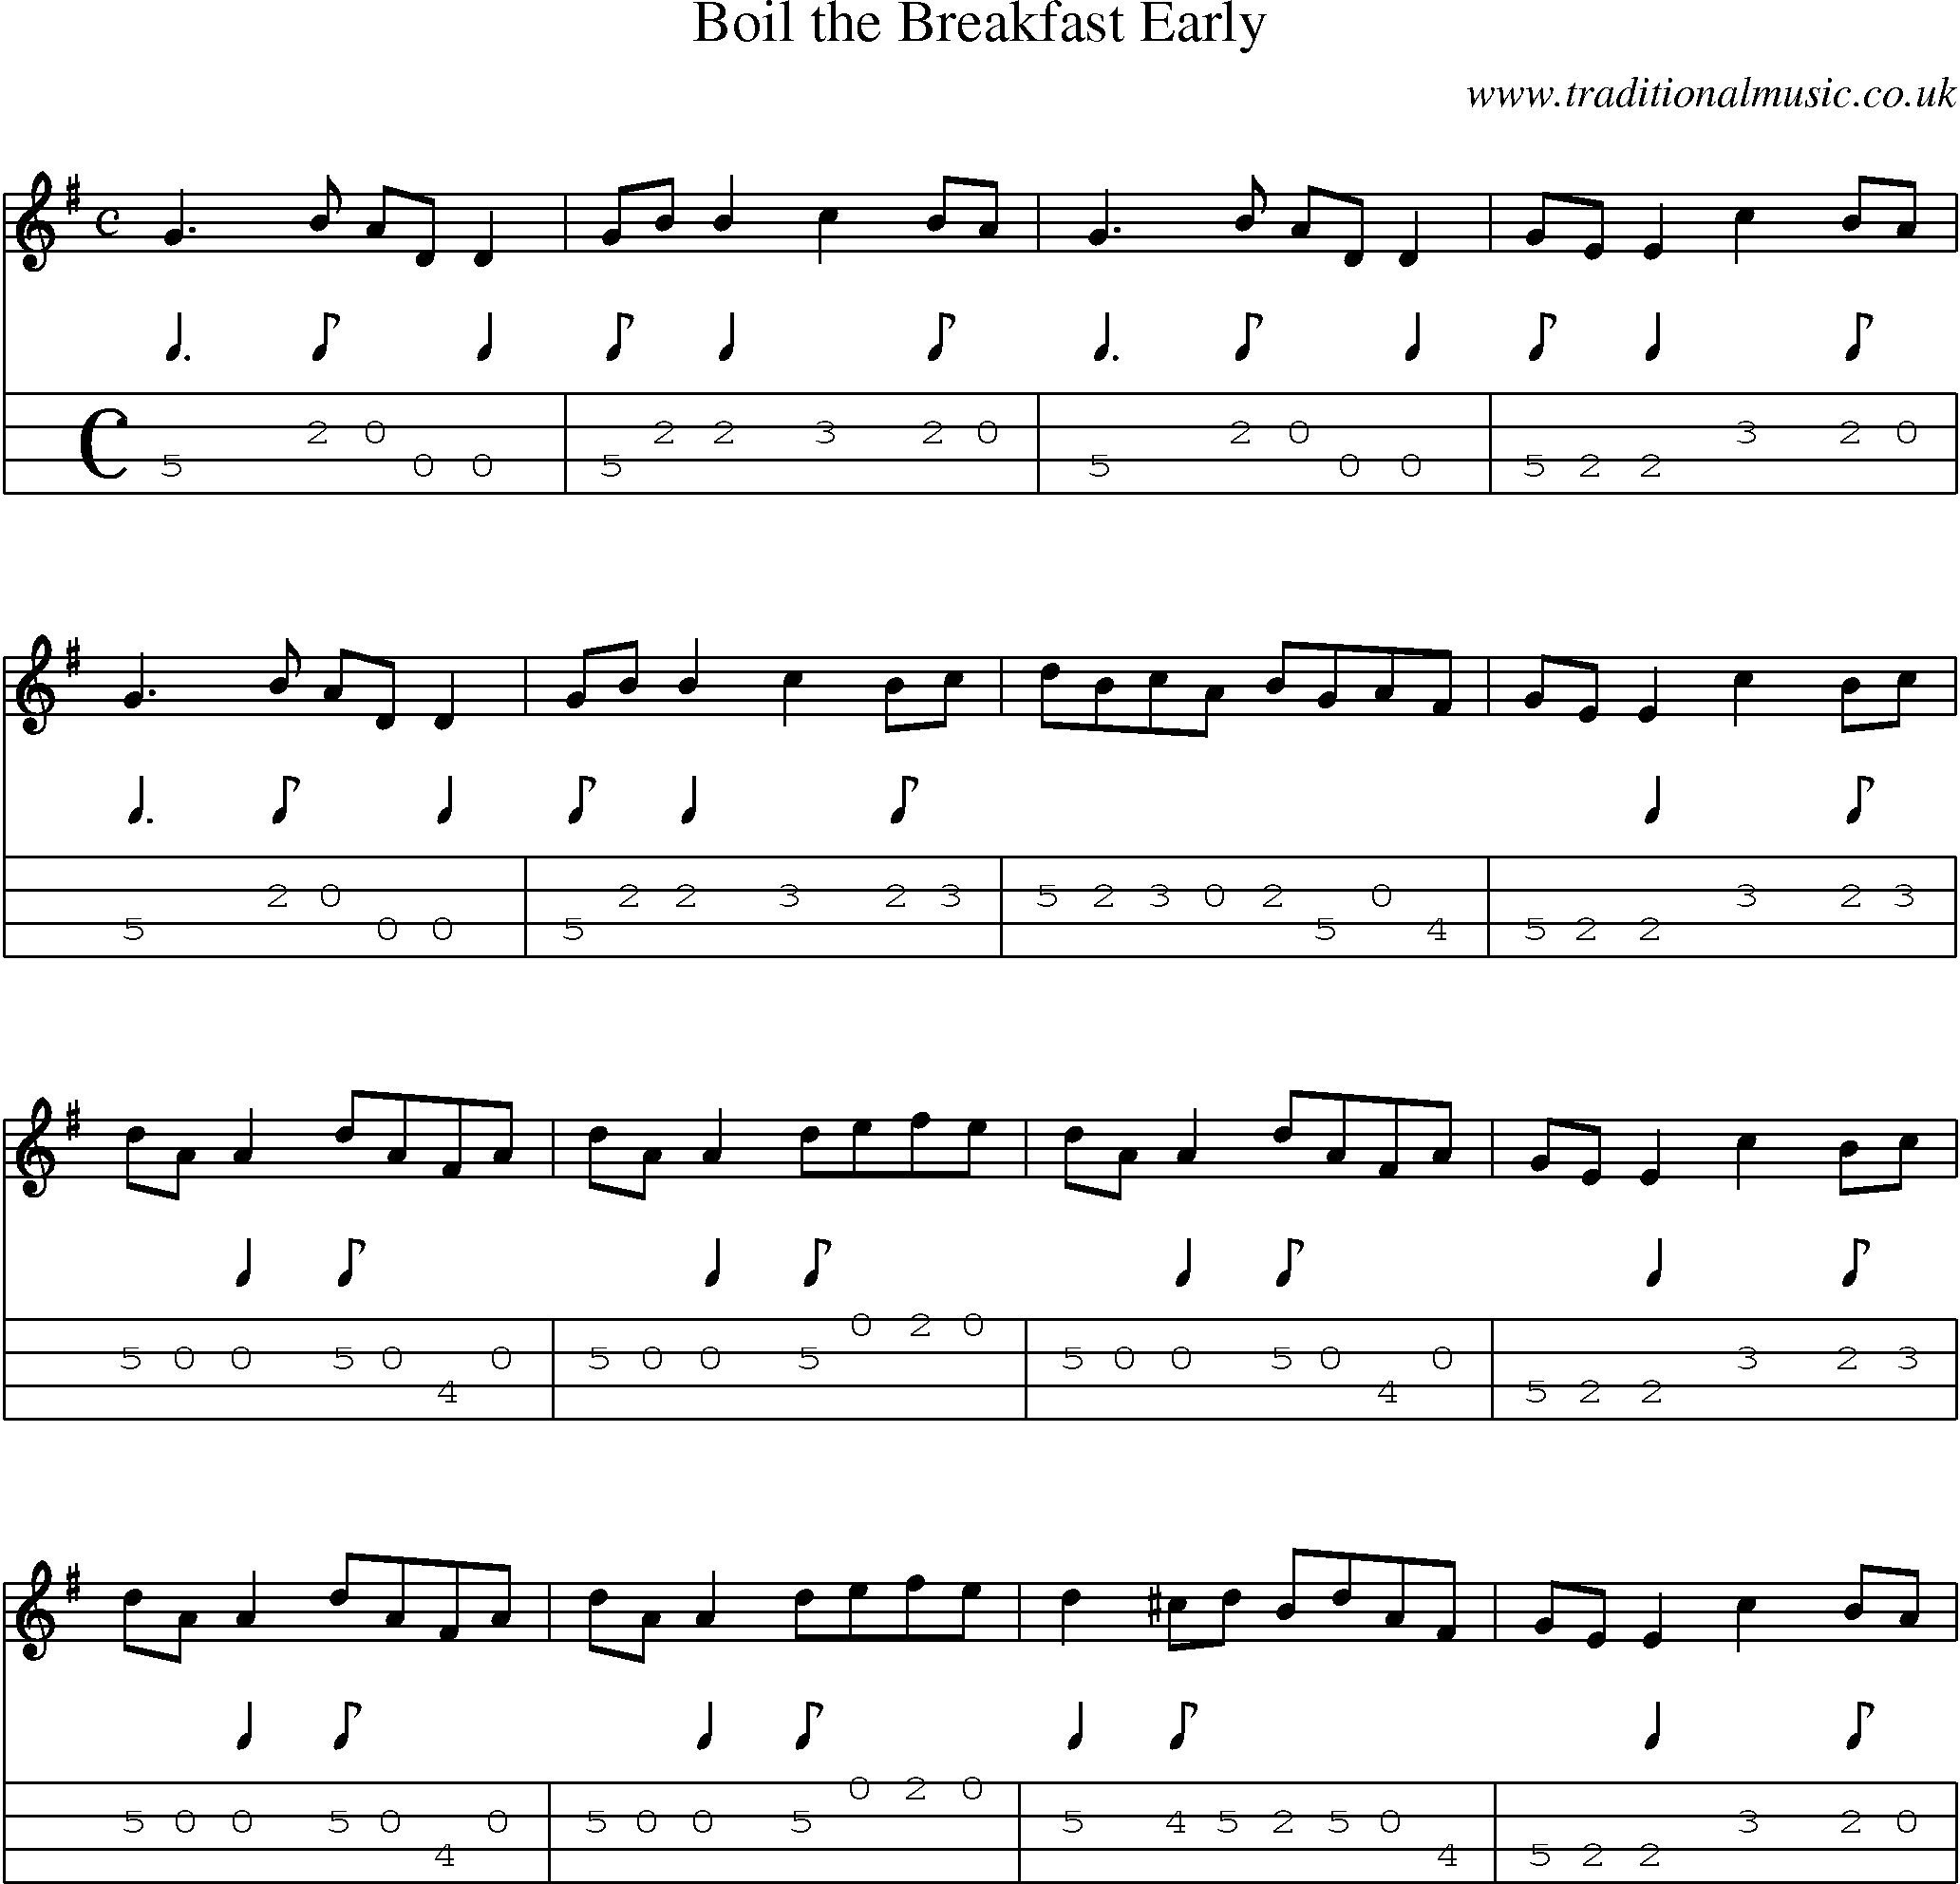 Music Score and Mandolin Tabs for Boil Breakfast Early